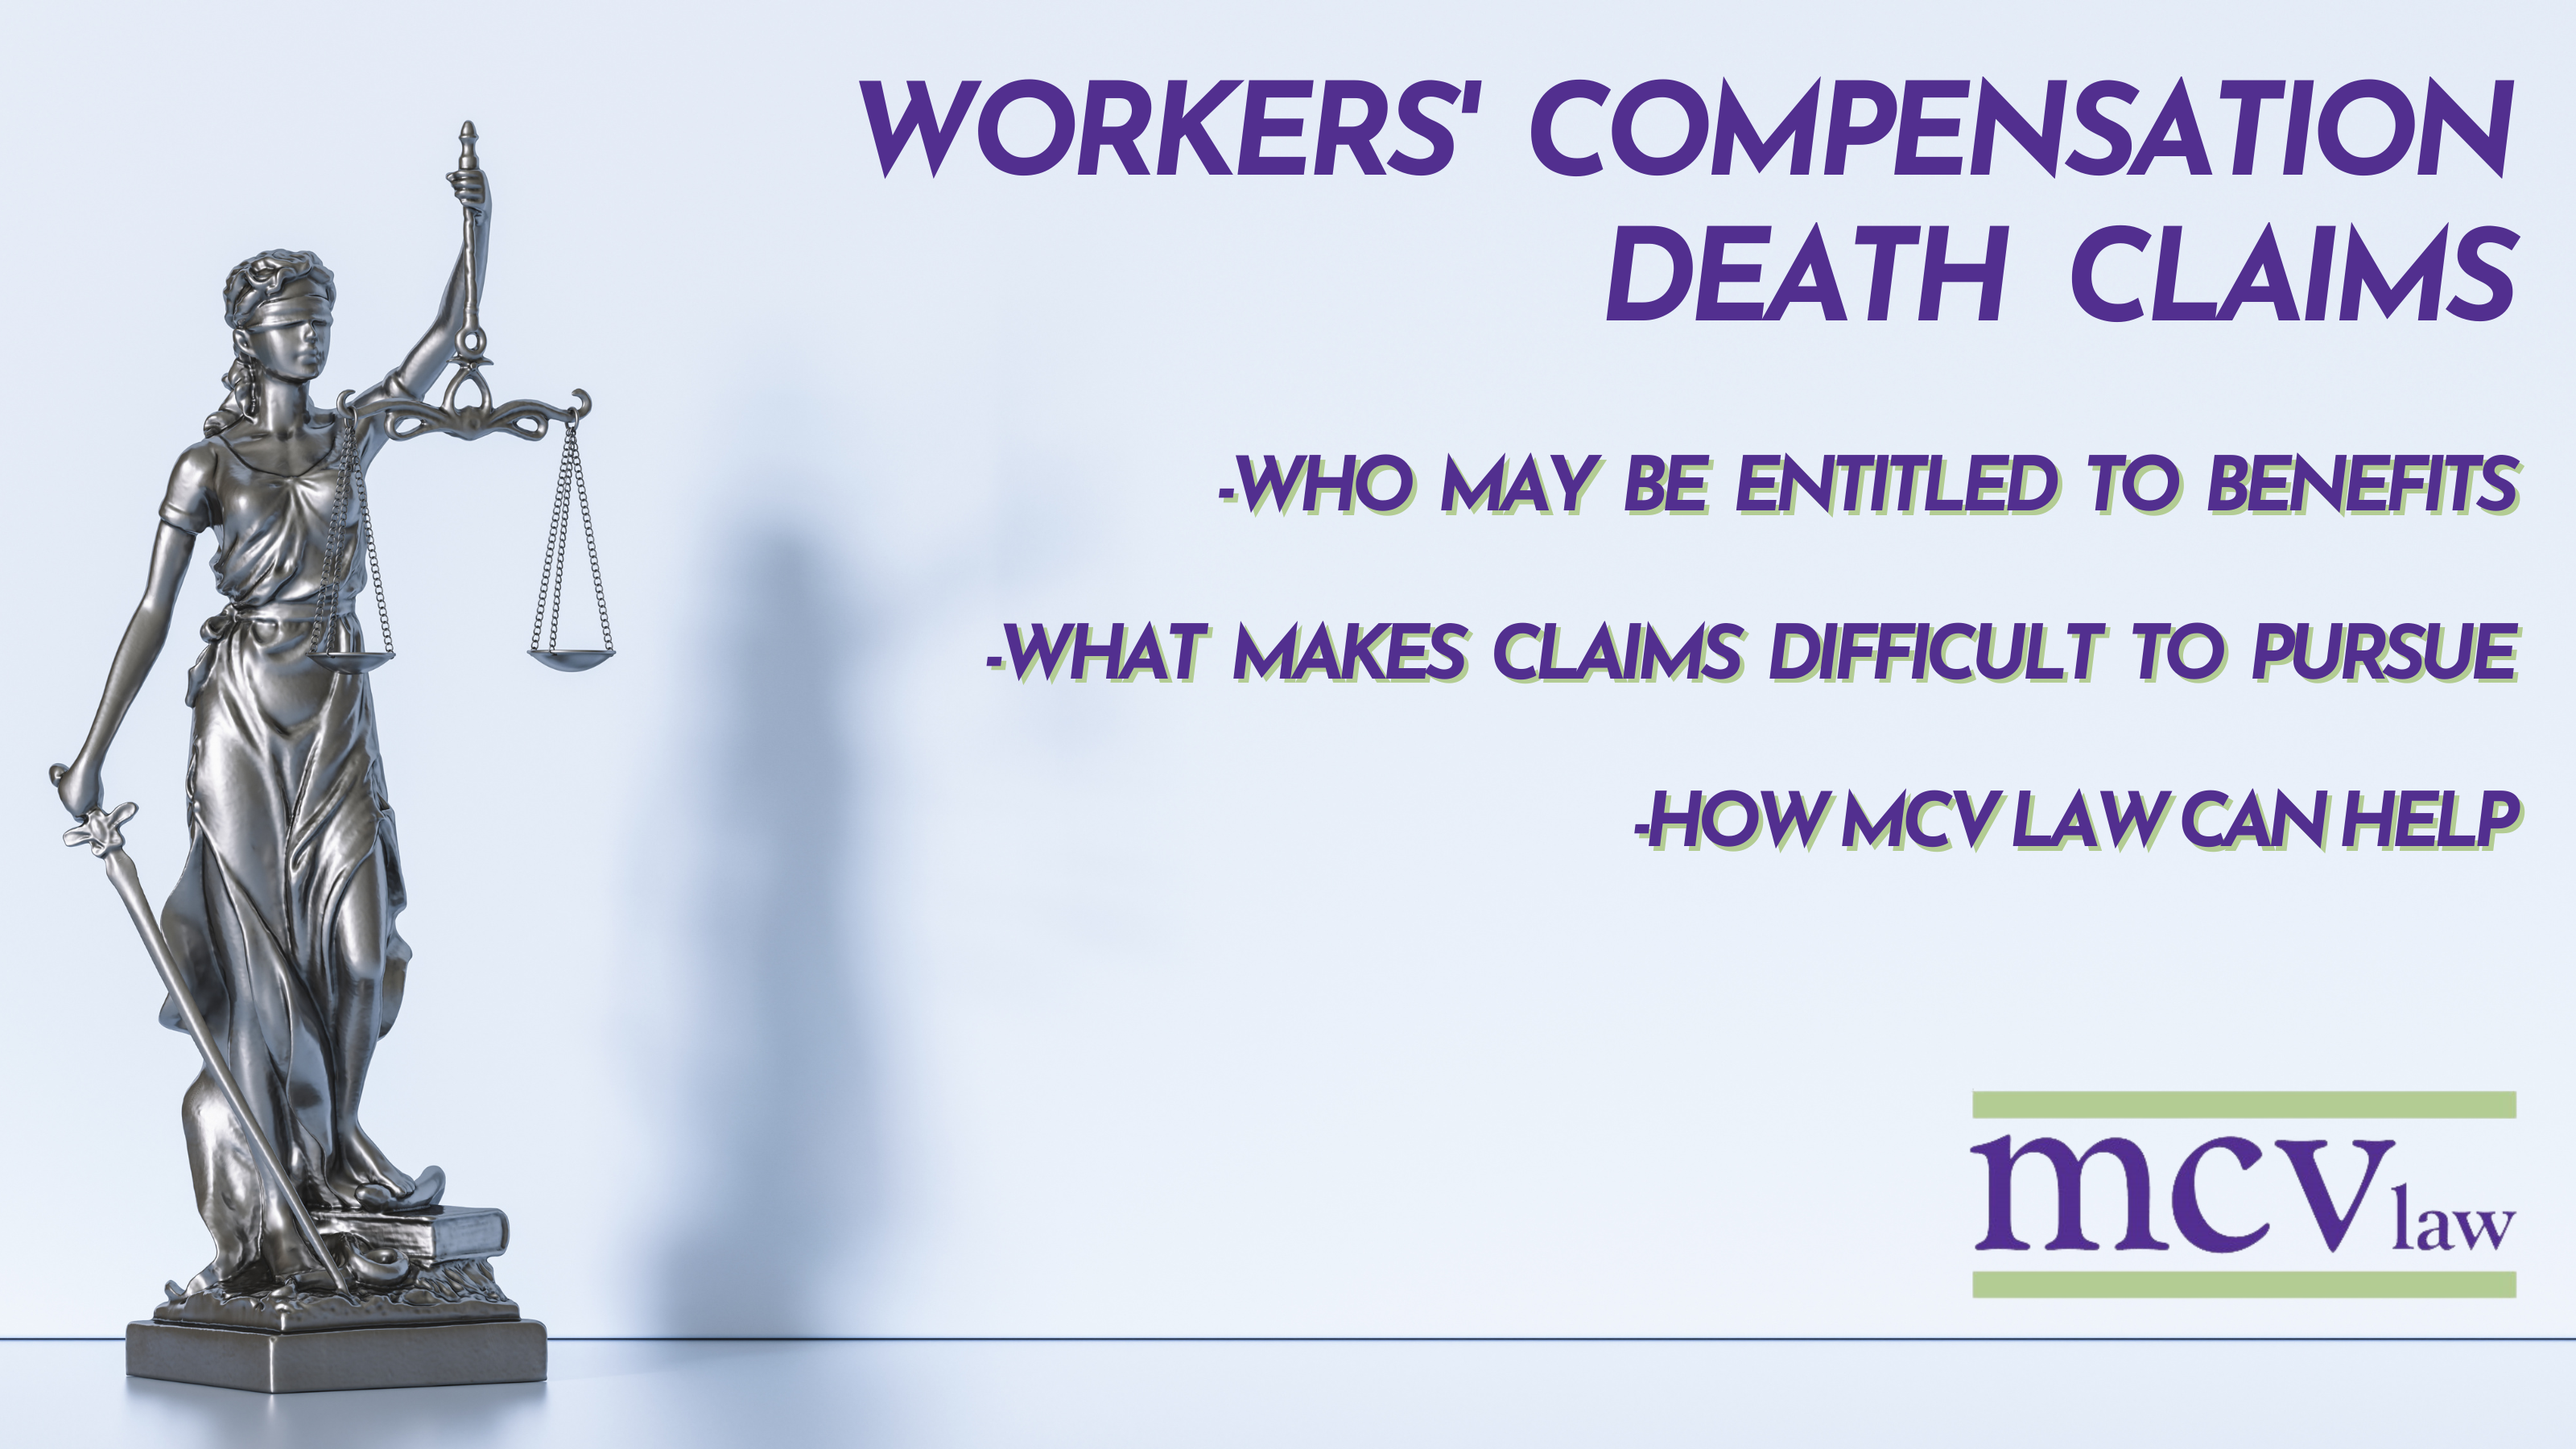 Workers' Compensation Death Claims in NY